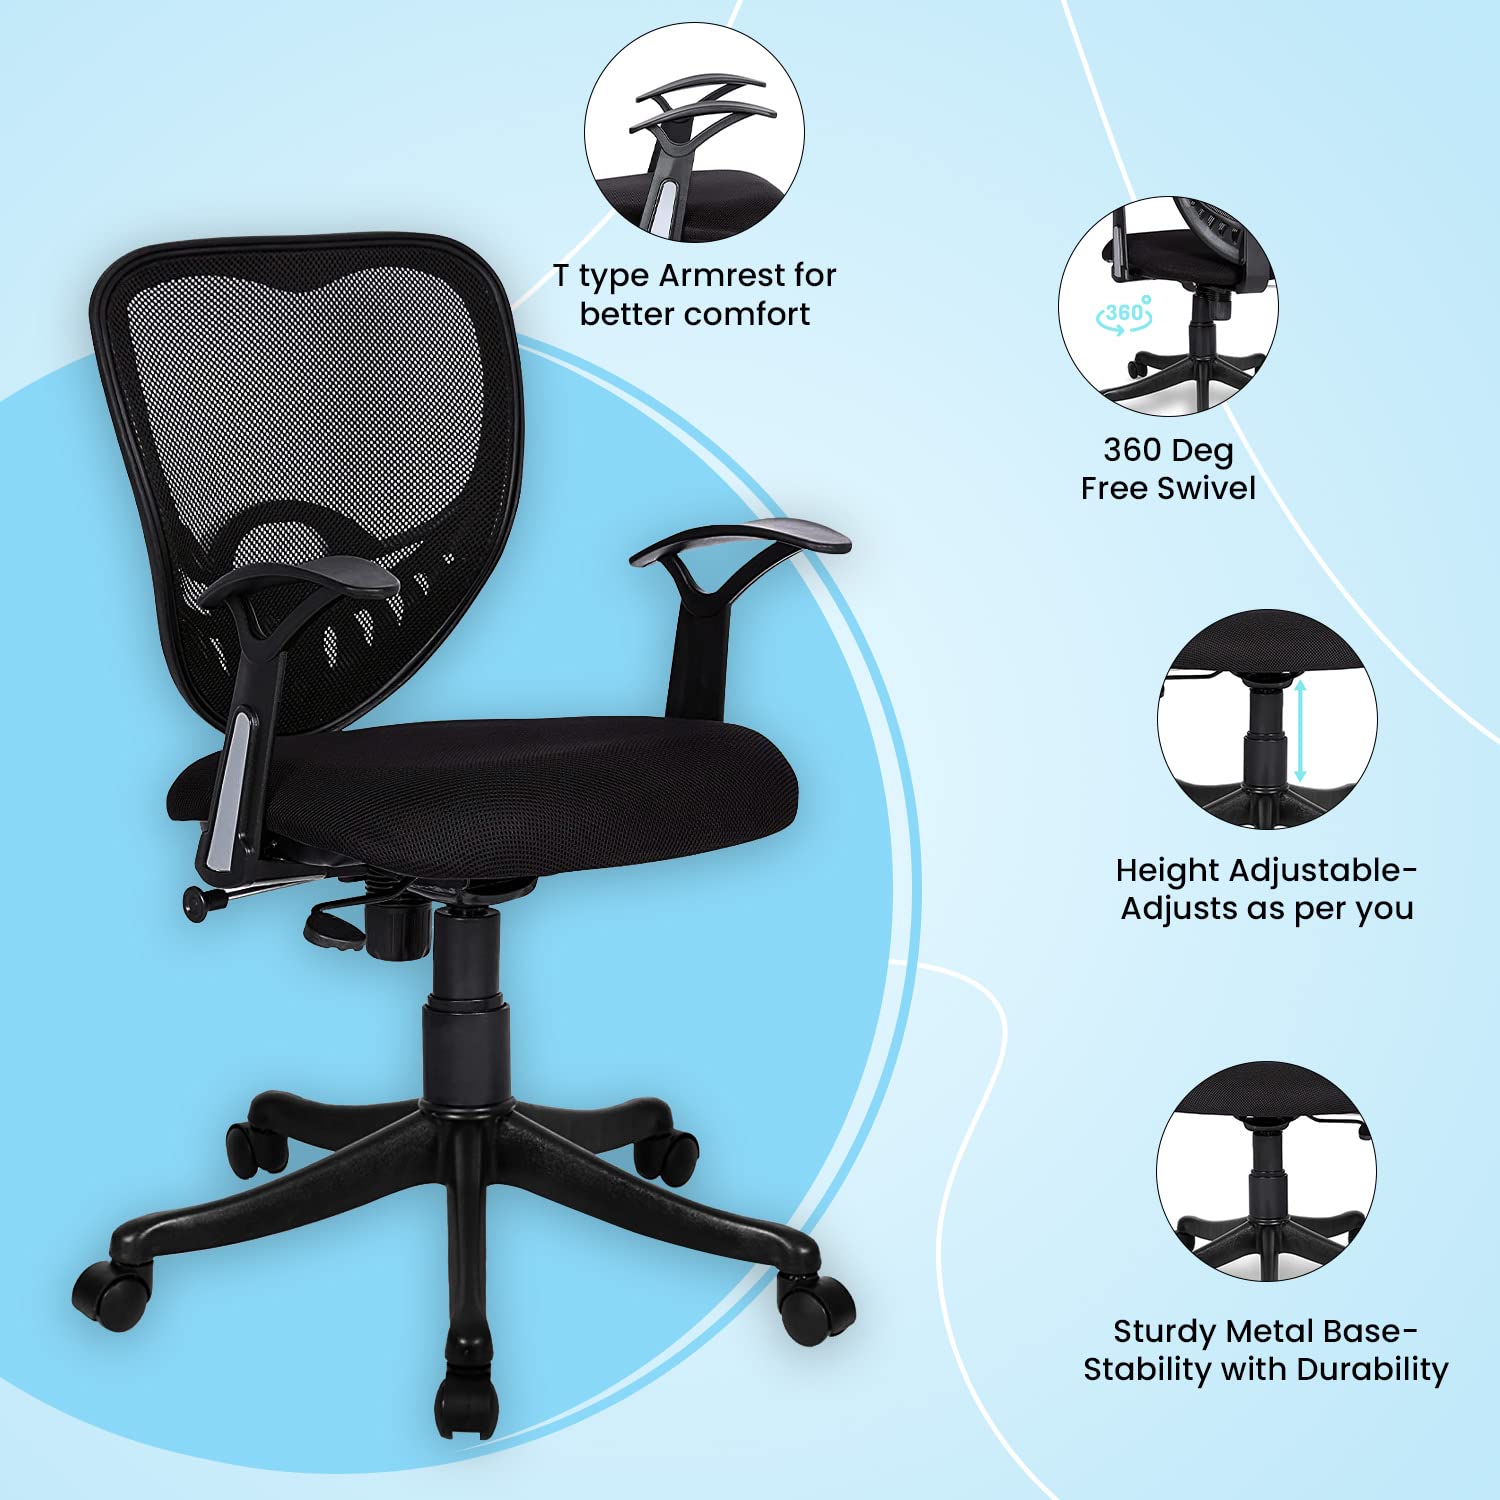 SAVYA HOME® Delta Plus Ergonomic Office Chair| Height Adjustable Seat | Upholstered Seat and T Type armrest Provides Better Comfort |Push Back Tilt Feature |Mid Back Executive Chair(Black, Qty-1)